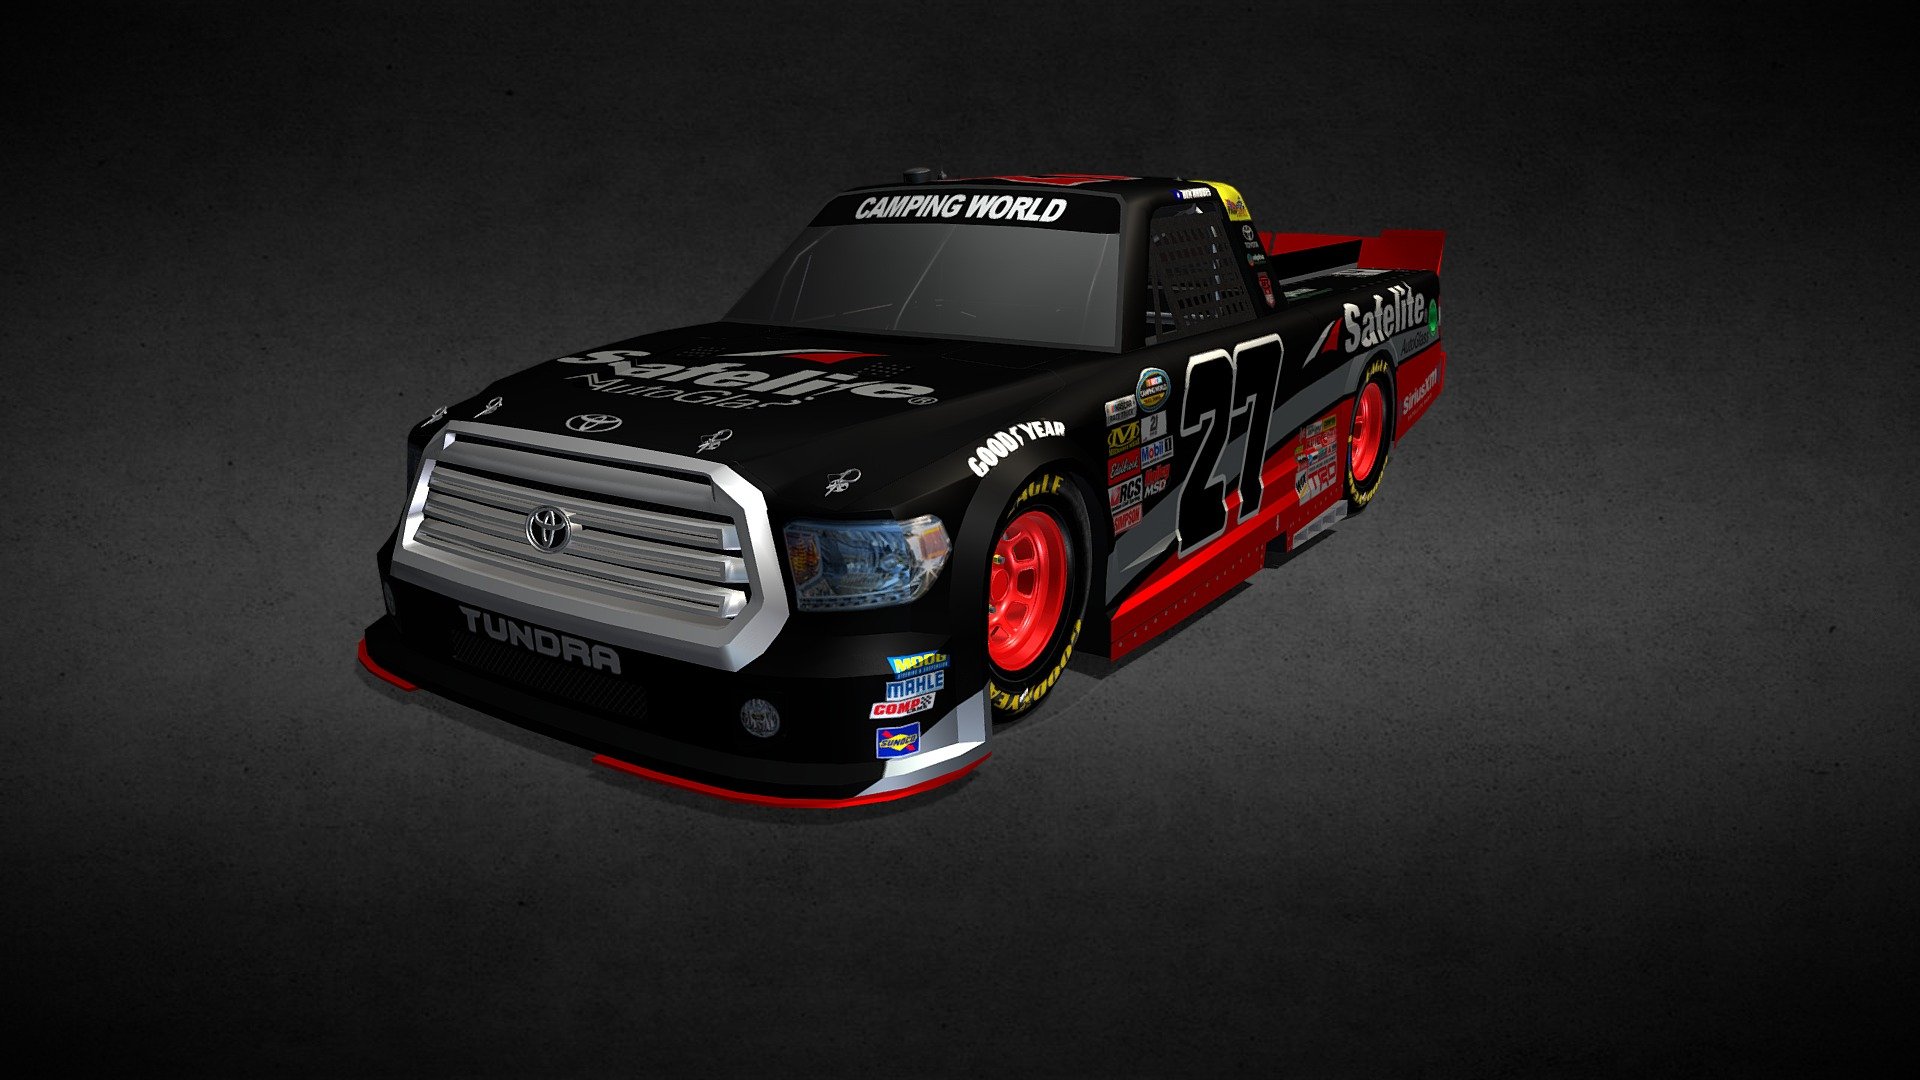 Low poly
Optimized for games
31767 Points
32266 Polys
other formats (.dae, .fbx, .obj, .3ds)
uvmap body/rims (.PSD)
2 skins (#27 Satelite, #13 Ride)
no interiors
 - Toyota Tundra - CampingWorldSeries - Buy Royalty Free 3D model by jdaniel_92 (@jdaniel_gz) 3d model